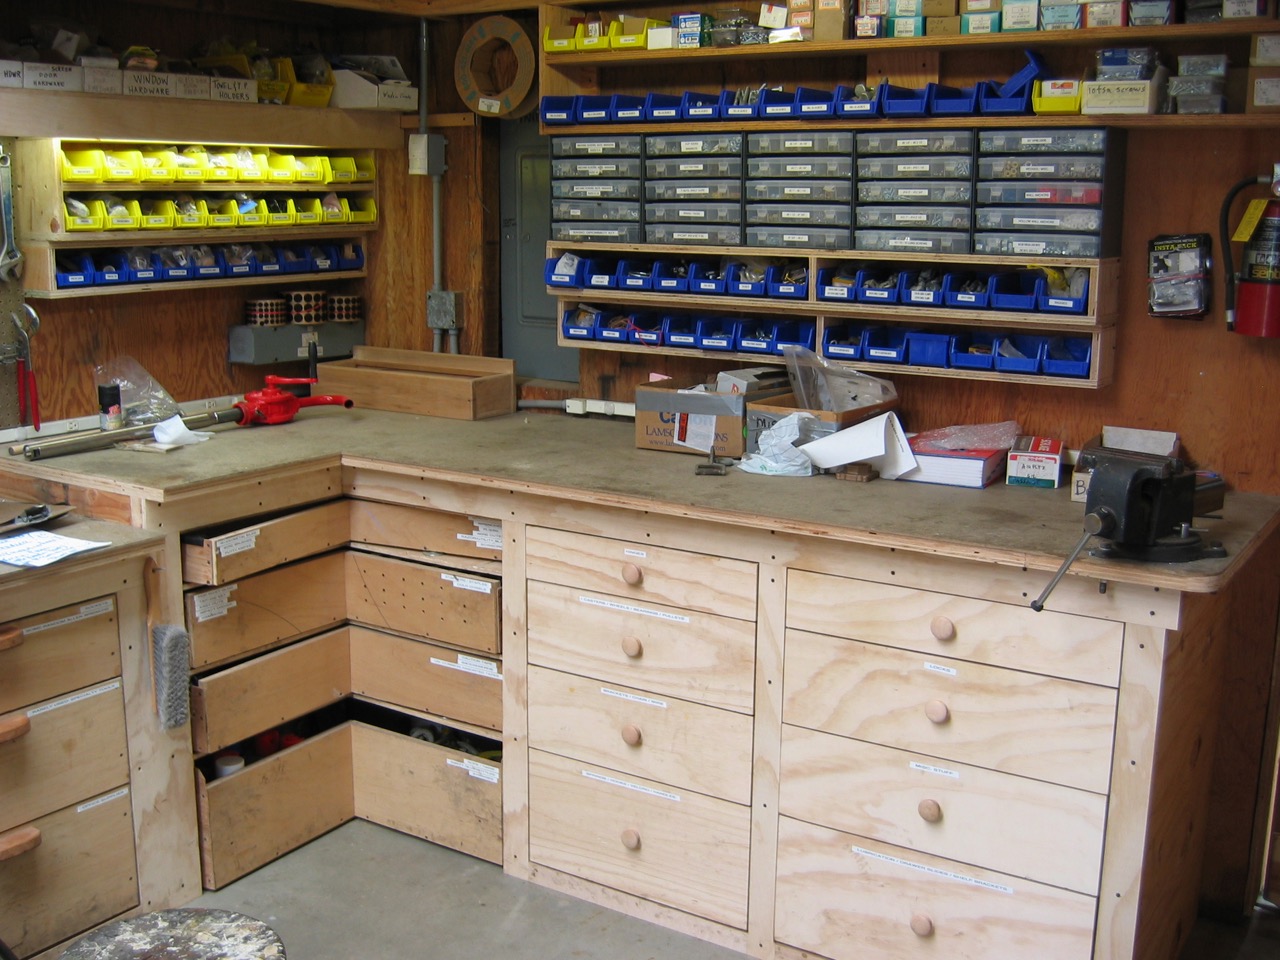 Workshop drawers and organization